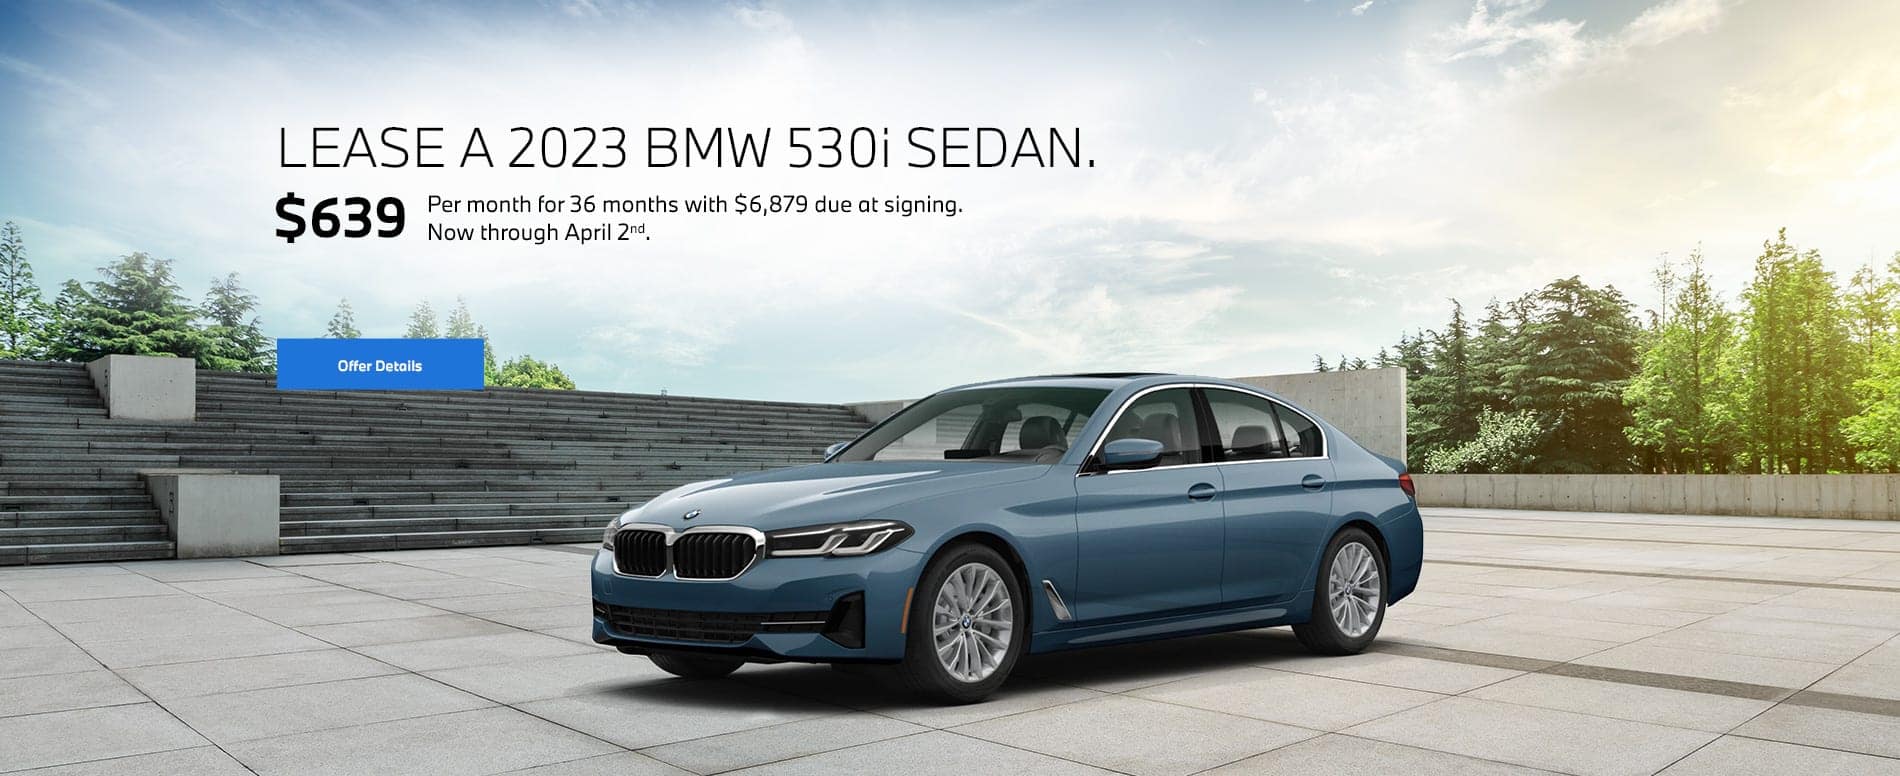 2023 5 series lease starting at $639 per month for 36 months